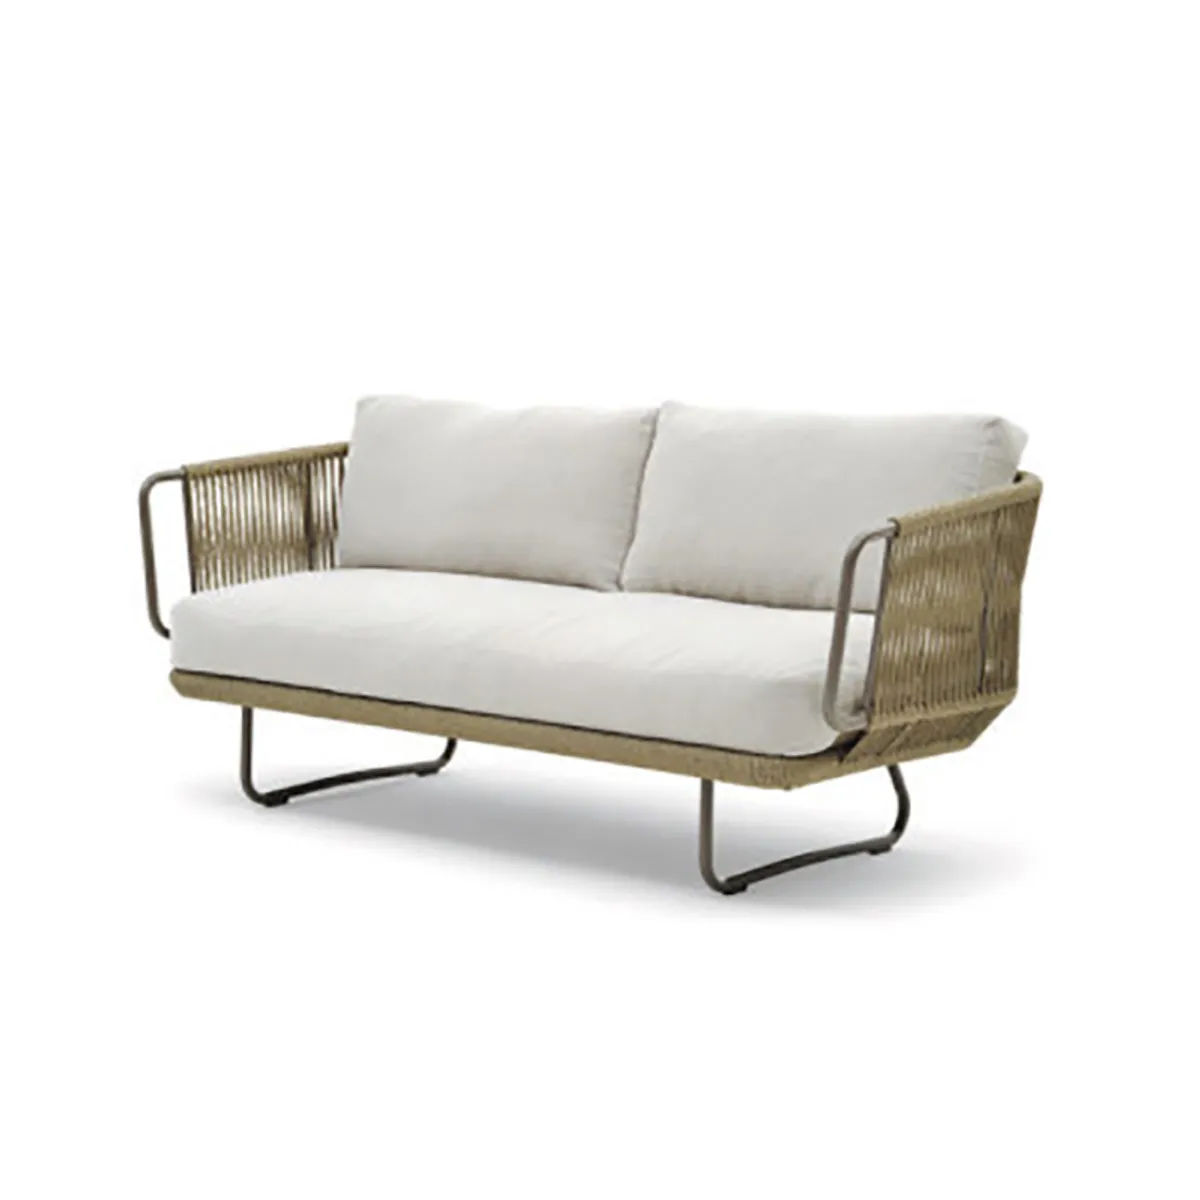 Babylon Sofa Outdoor Lounge Furniture For Poolside Cafes And Hotel Terraaces Insideoutcontracts 030